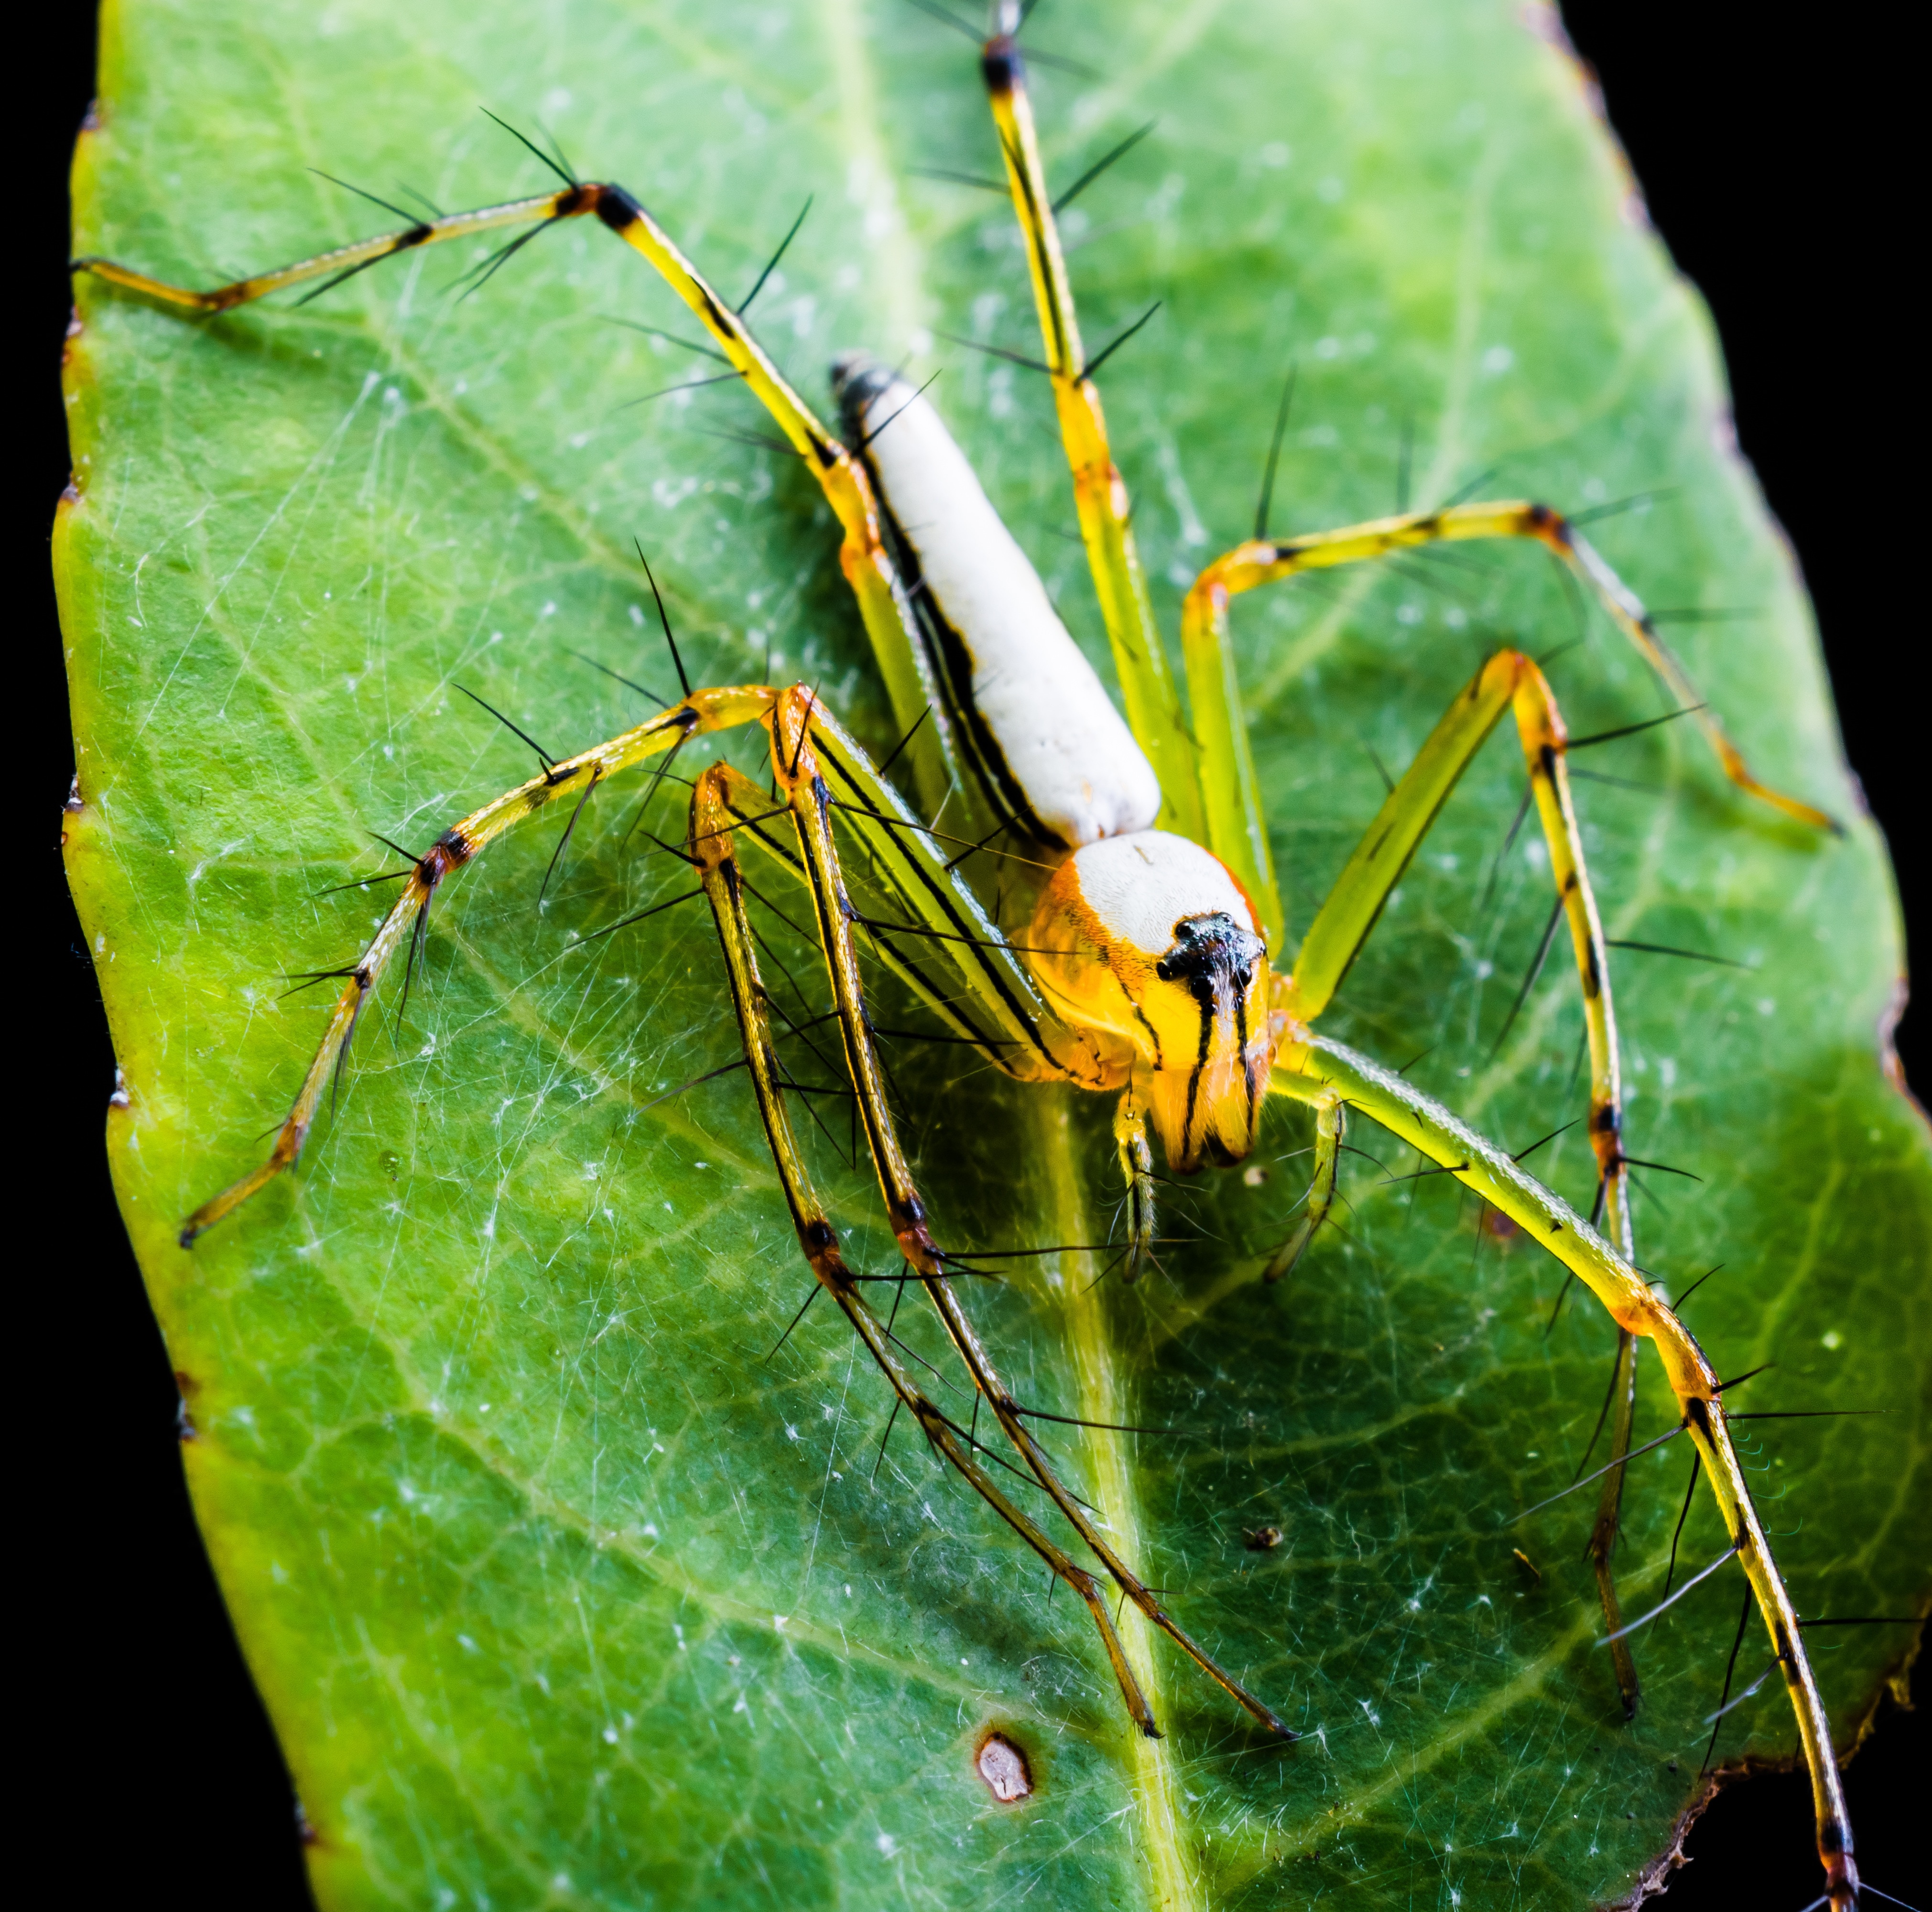 yellow spider on leaf closeup photography during daytime